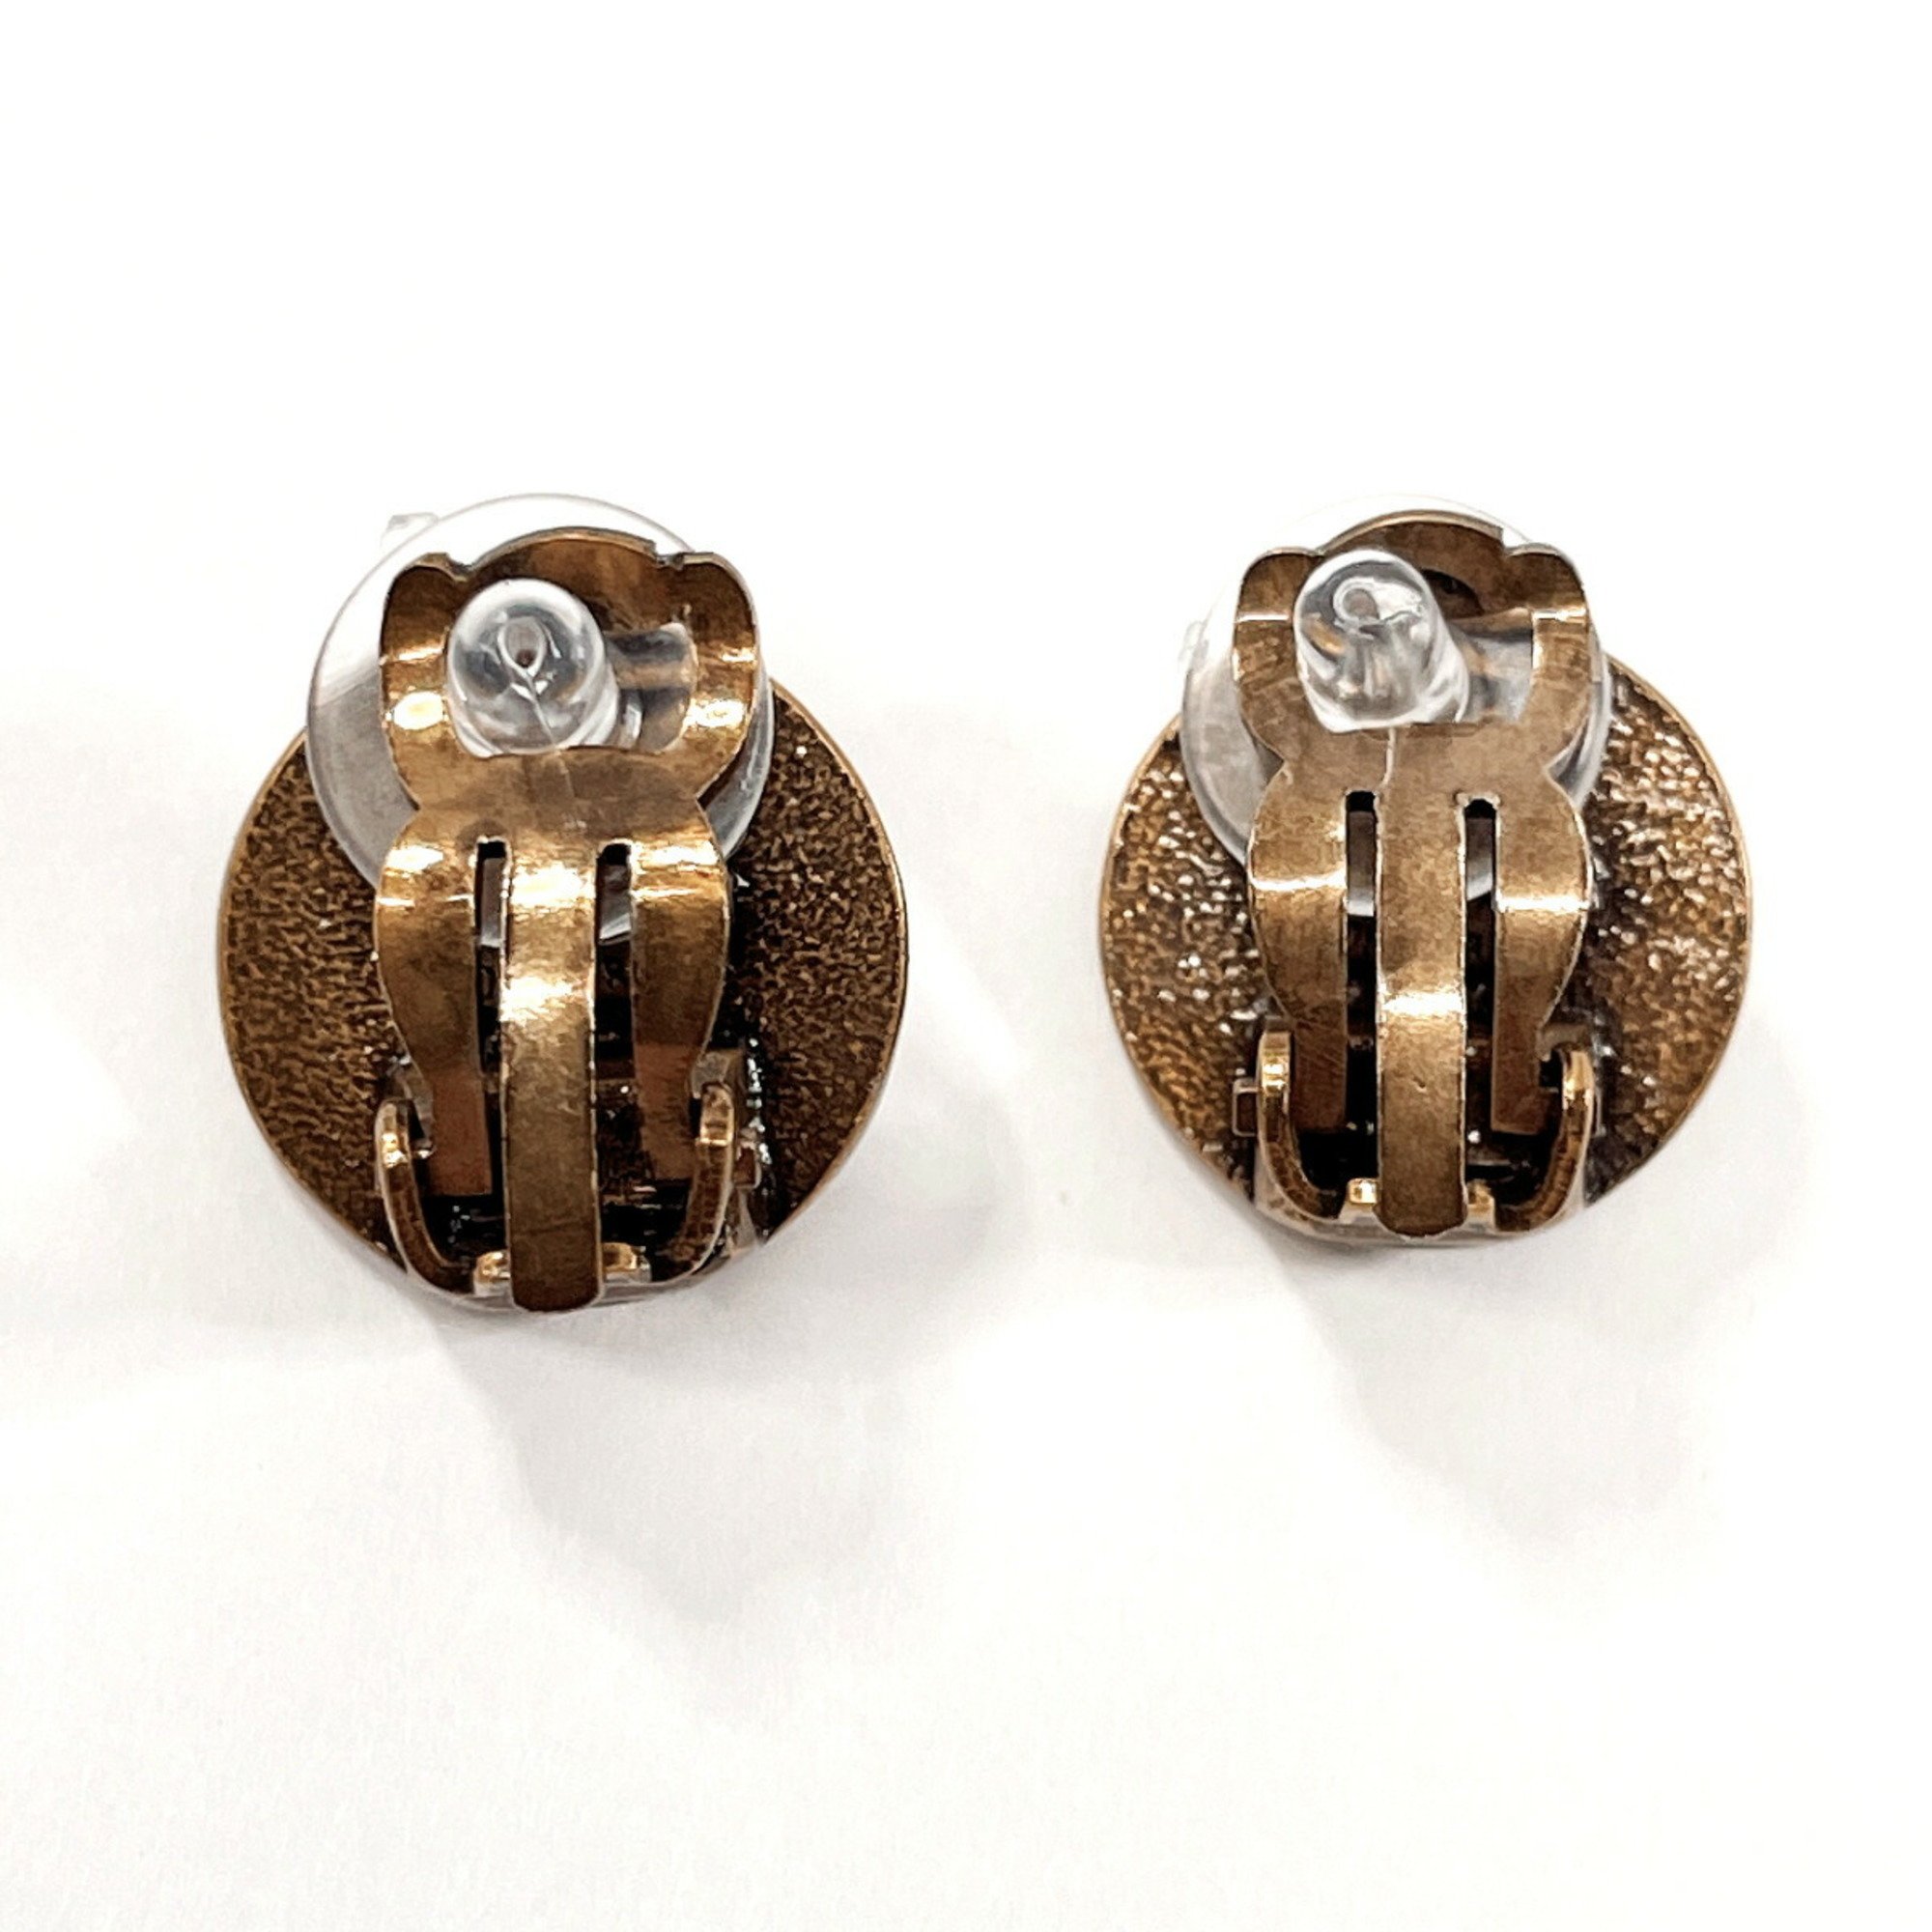 CHANEL Cocomark Vintage Earrings Metal Gold 97 A Stamp Women's